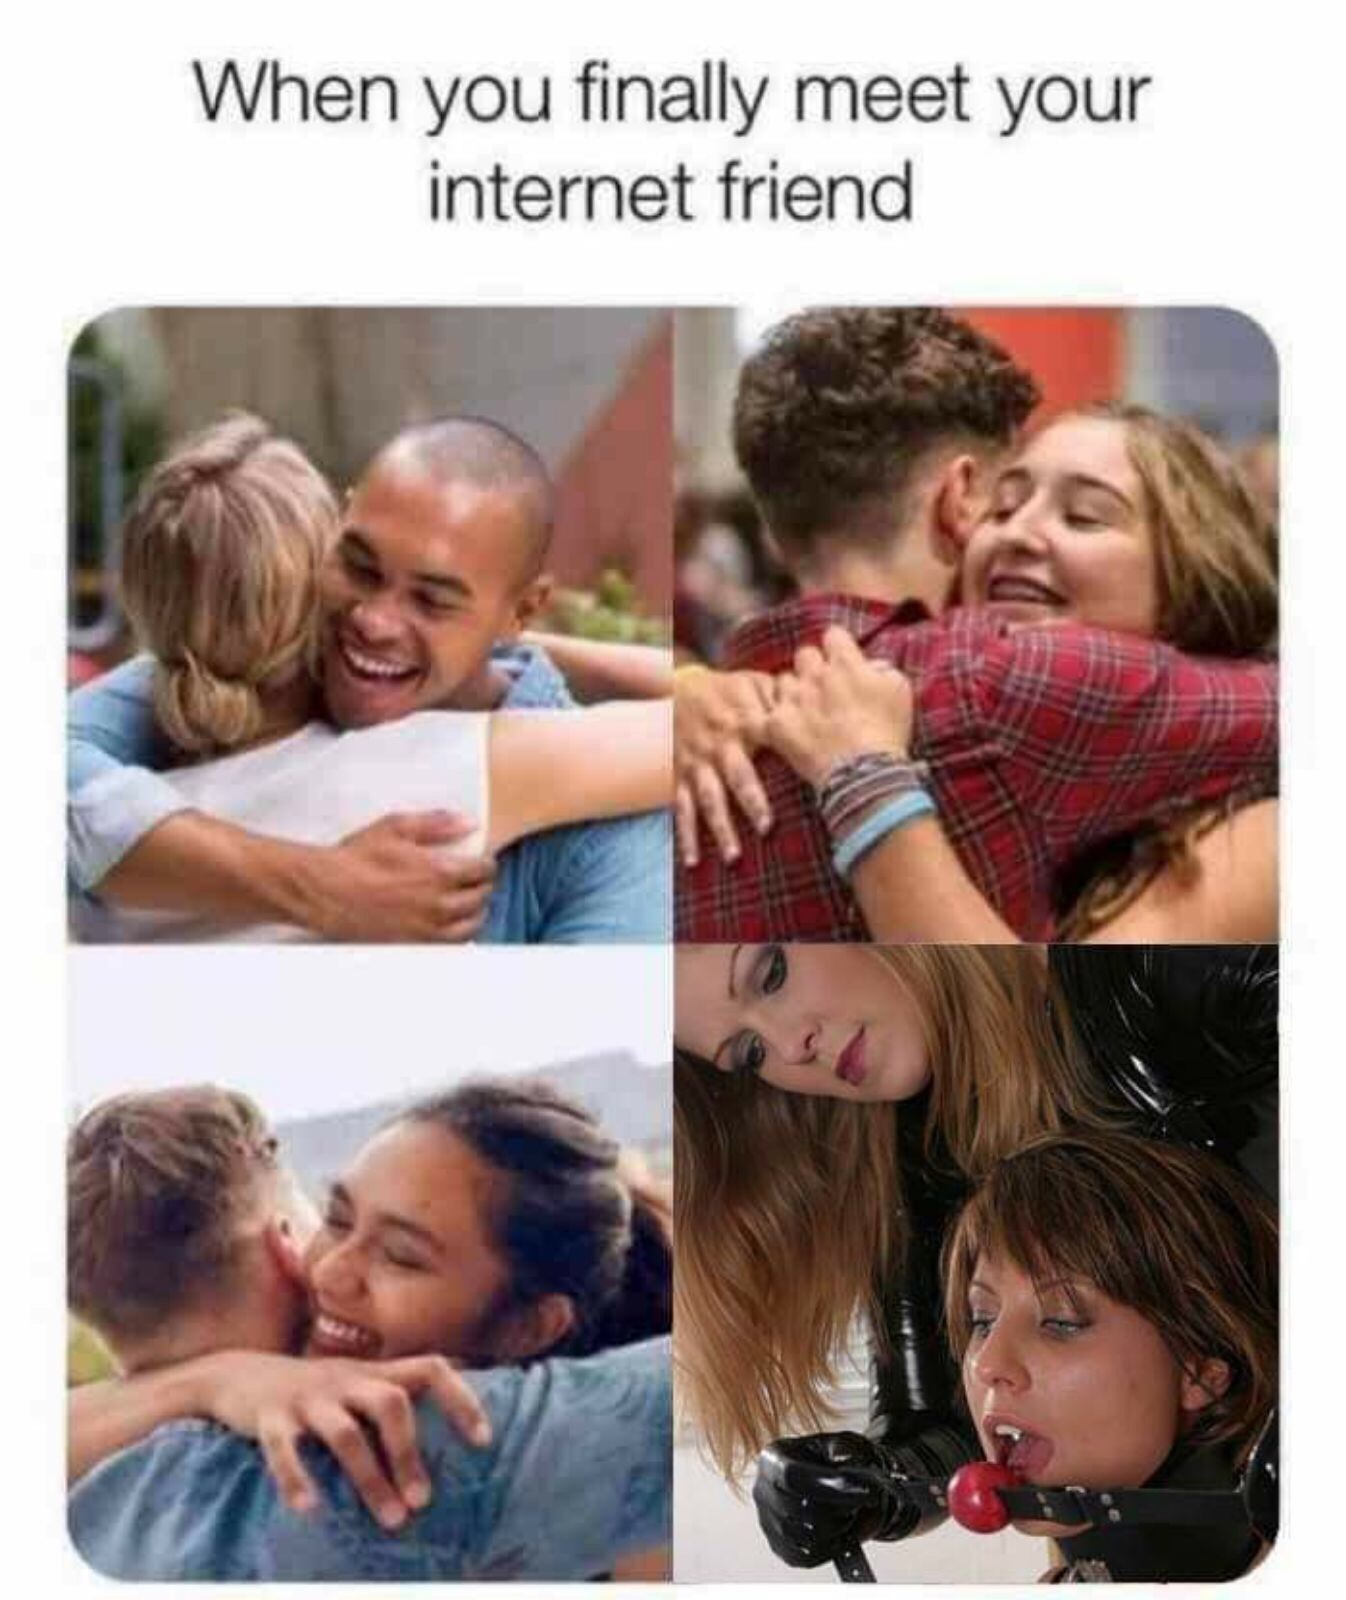 work meme about meeting internet friends for sexual purposes